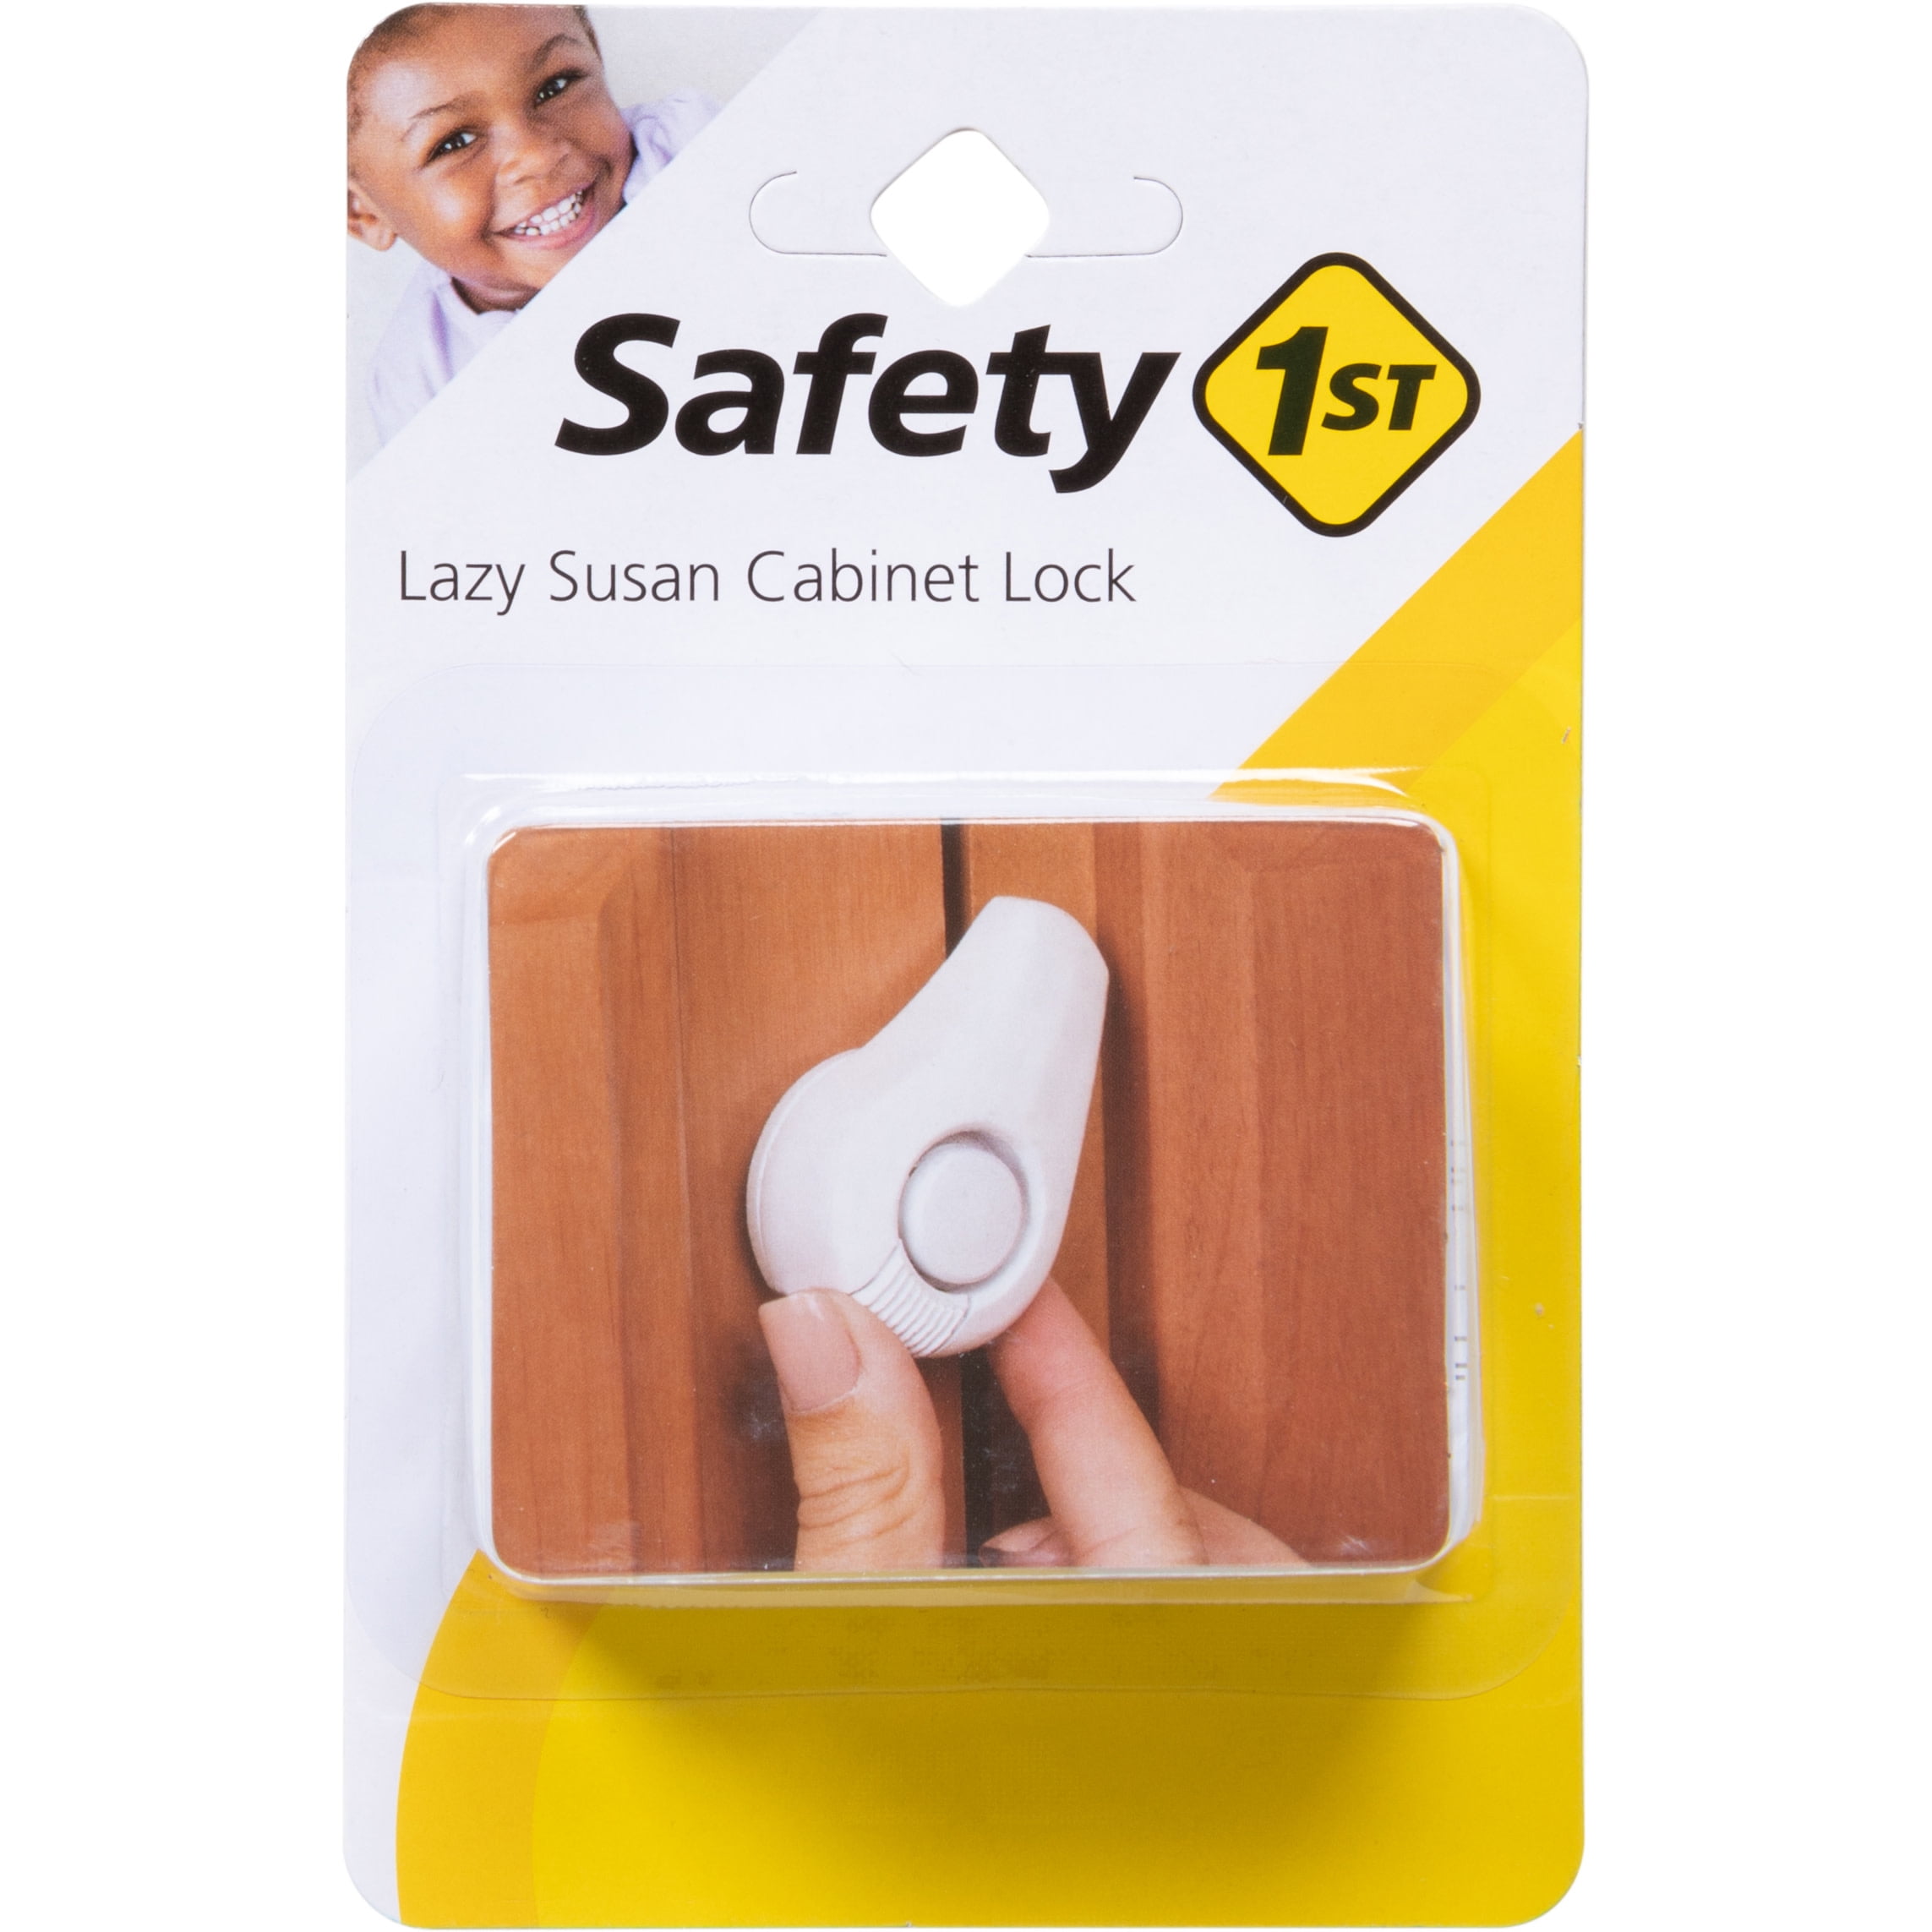 Safety 1st Cabinet Locks Recalled Due to Lock Failure; Children Can Gain  Unintended Access to Dangerous Items